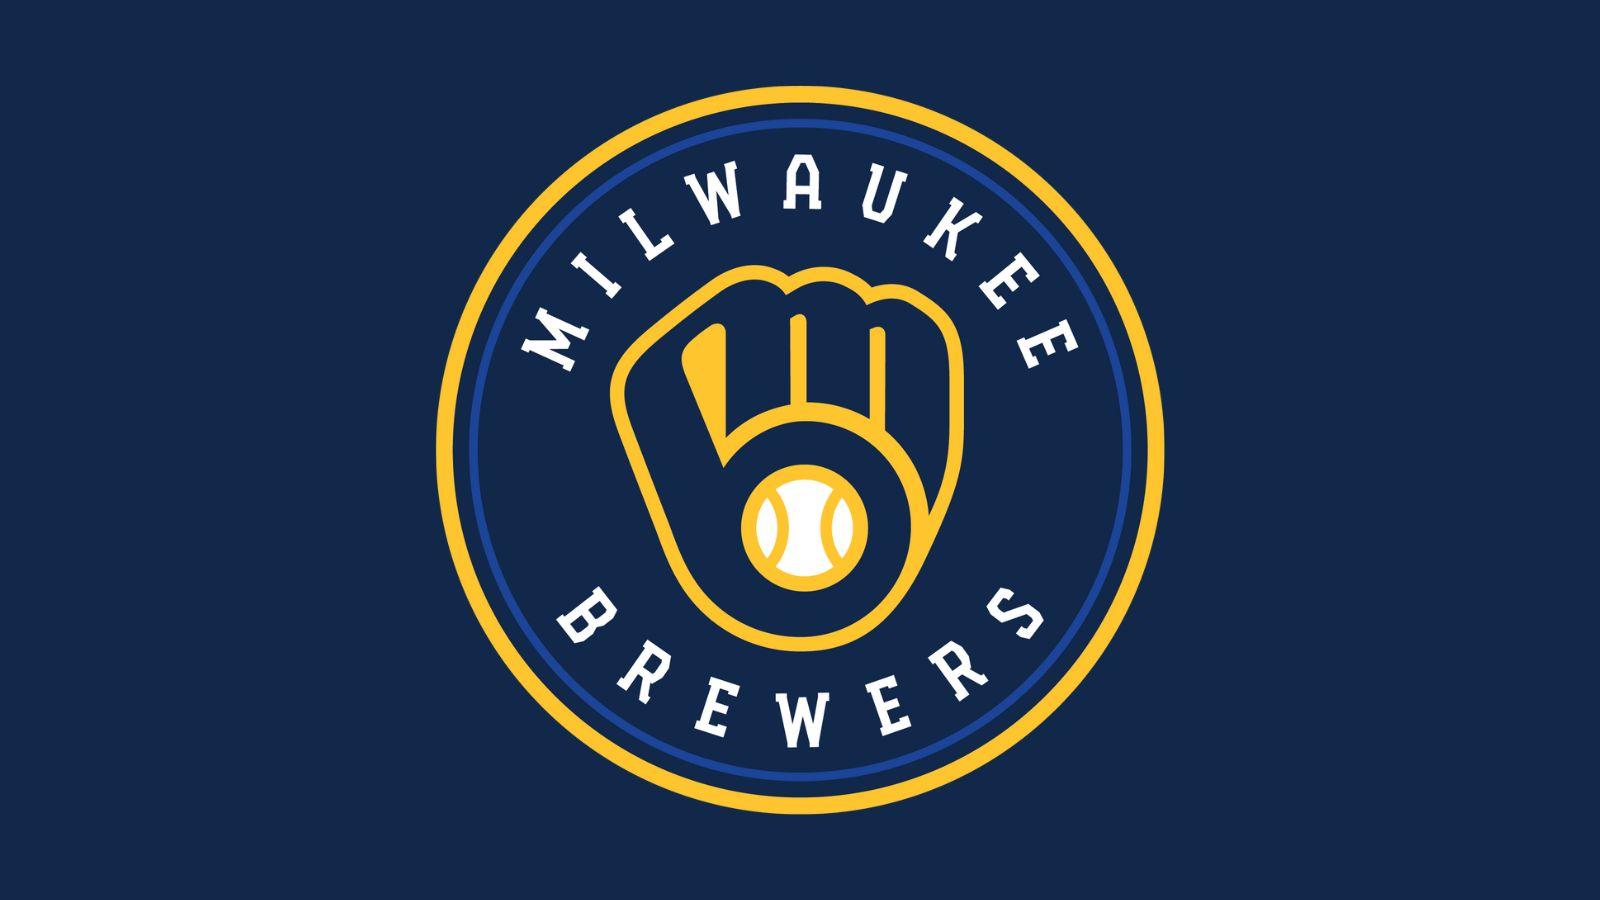 Brewers-Orioles game on Apple TV+ requires subscription